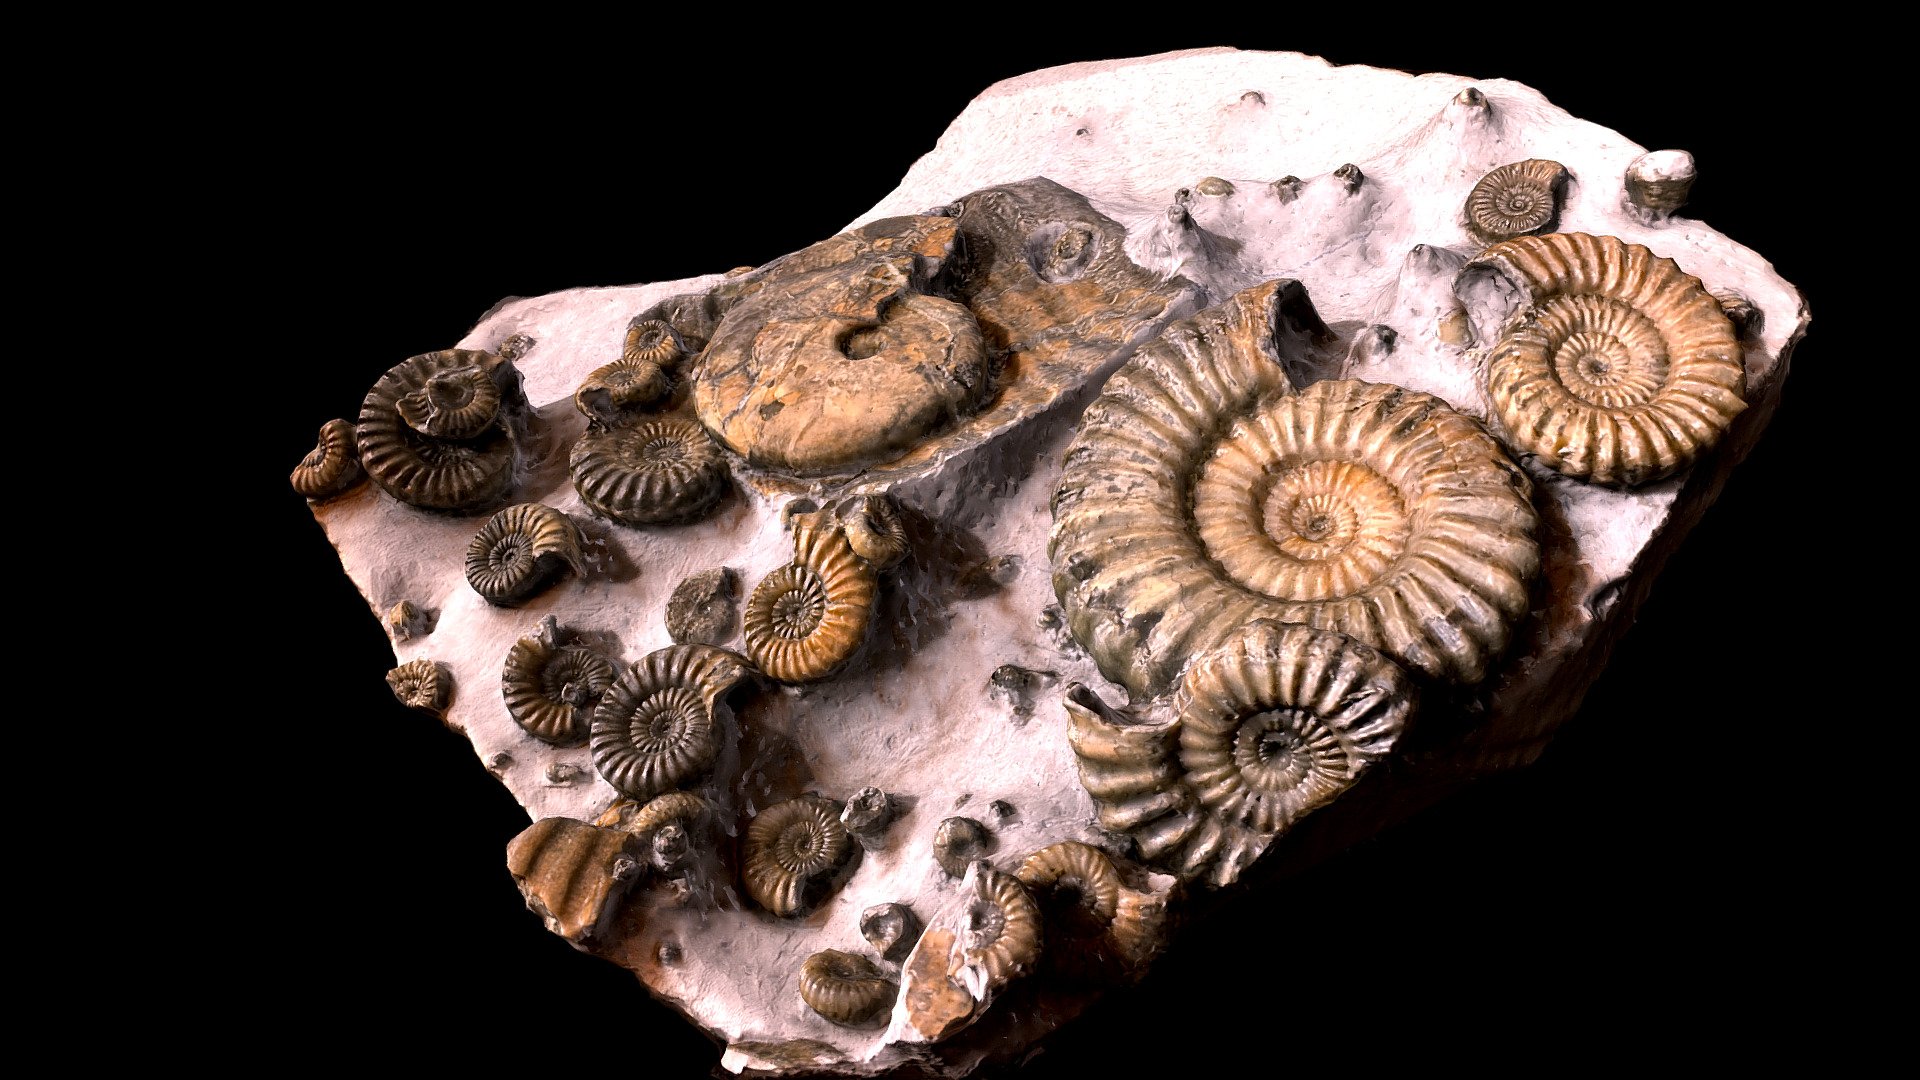 Fossils are often a labour of love and this is a good example of that. Sometimes they tell a story too. This ammonite assemblage from the Jurassic green ammonite beds of Charmouth, Dorset seems to have been trapped inside a larger Liparoceras ammonite. However, only pieces of the larger ammonite remain, perhaps as a result of breaking apart from the pressure of the smaller ammonites trapped in the body chamber. There are several different species preserved including Tragyphyloceras, Aegoceras? shells and juvenile ammonite specimens. The largest ammonite measures 8.5 cm The matrix measures 24 cm x 23.5 cm - Multi Green Ammonite Fossil 3D Rendered Model - 3D model by Naturalselectionfossils 3d model